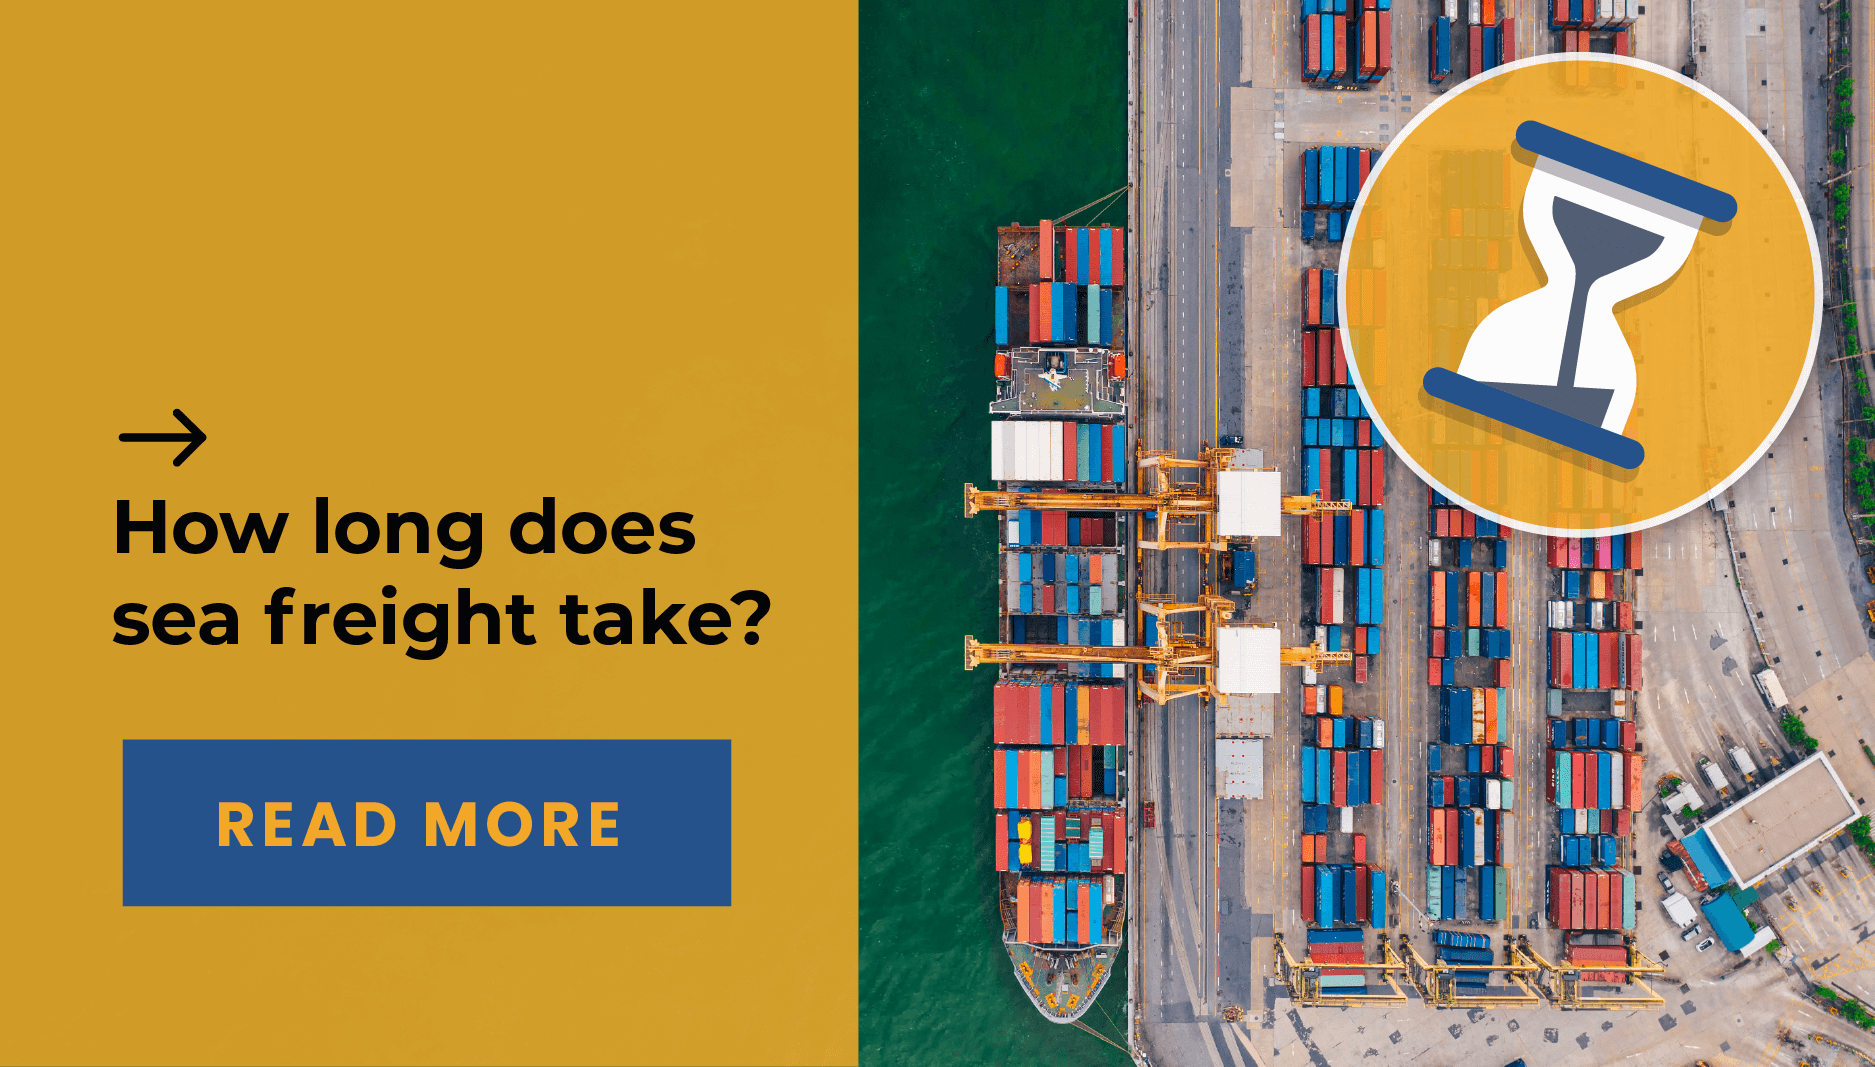 How long does sea freight take?